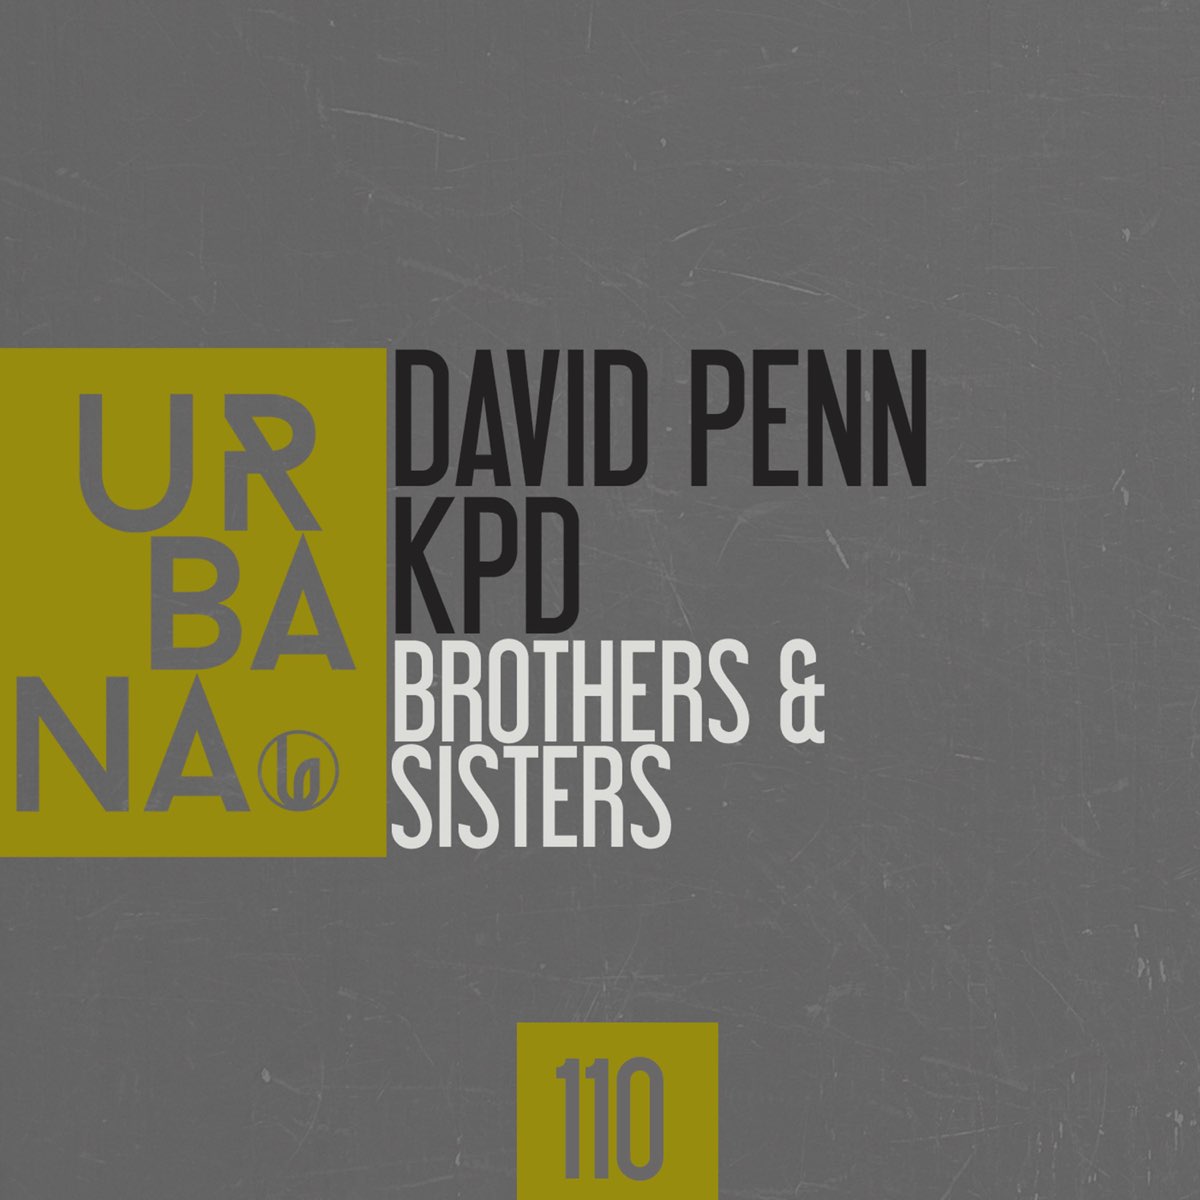 Have you got brothers or sisters. Jerkin David Penn/KPD. David Penn & KPD - why don't. David Penn - different story (d Ramirez Remix). Yass, David Penn can't Live without you.